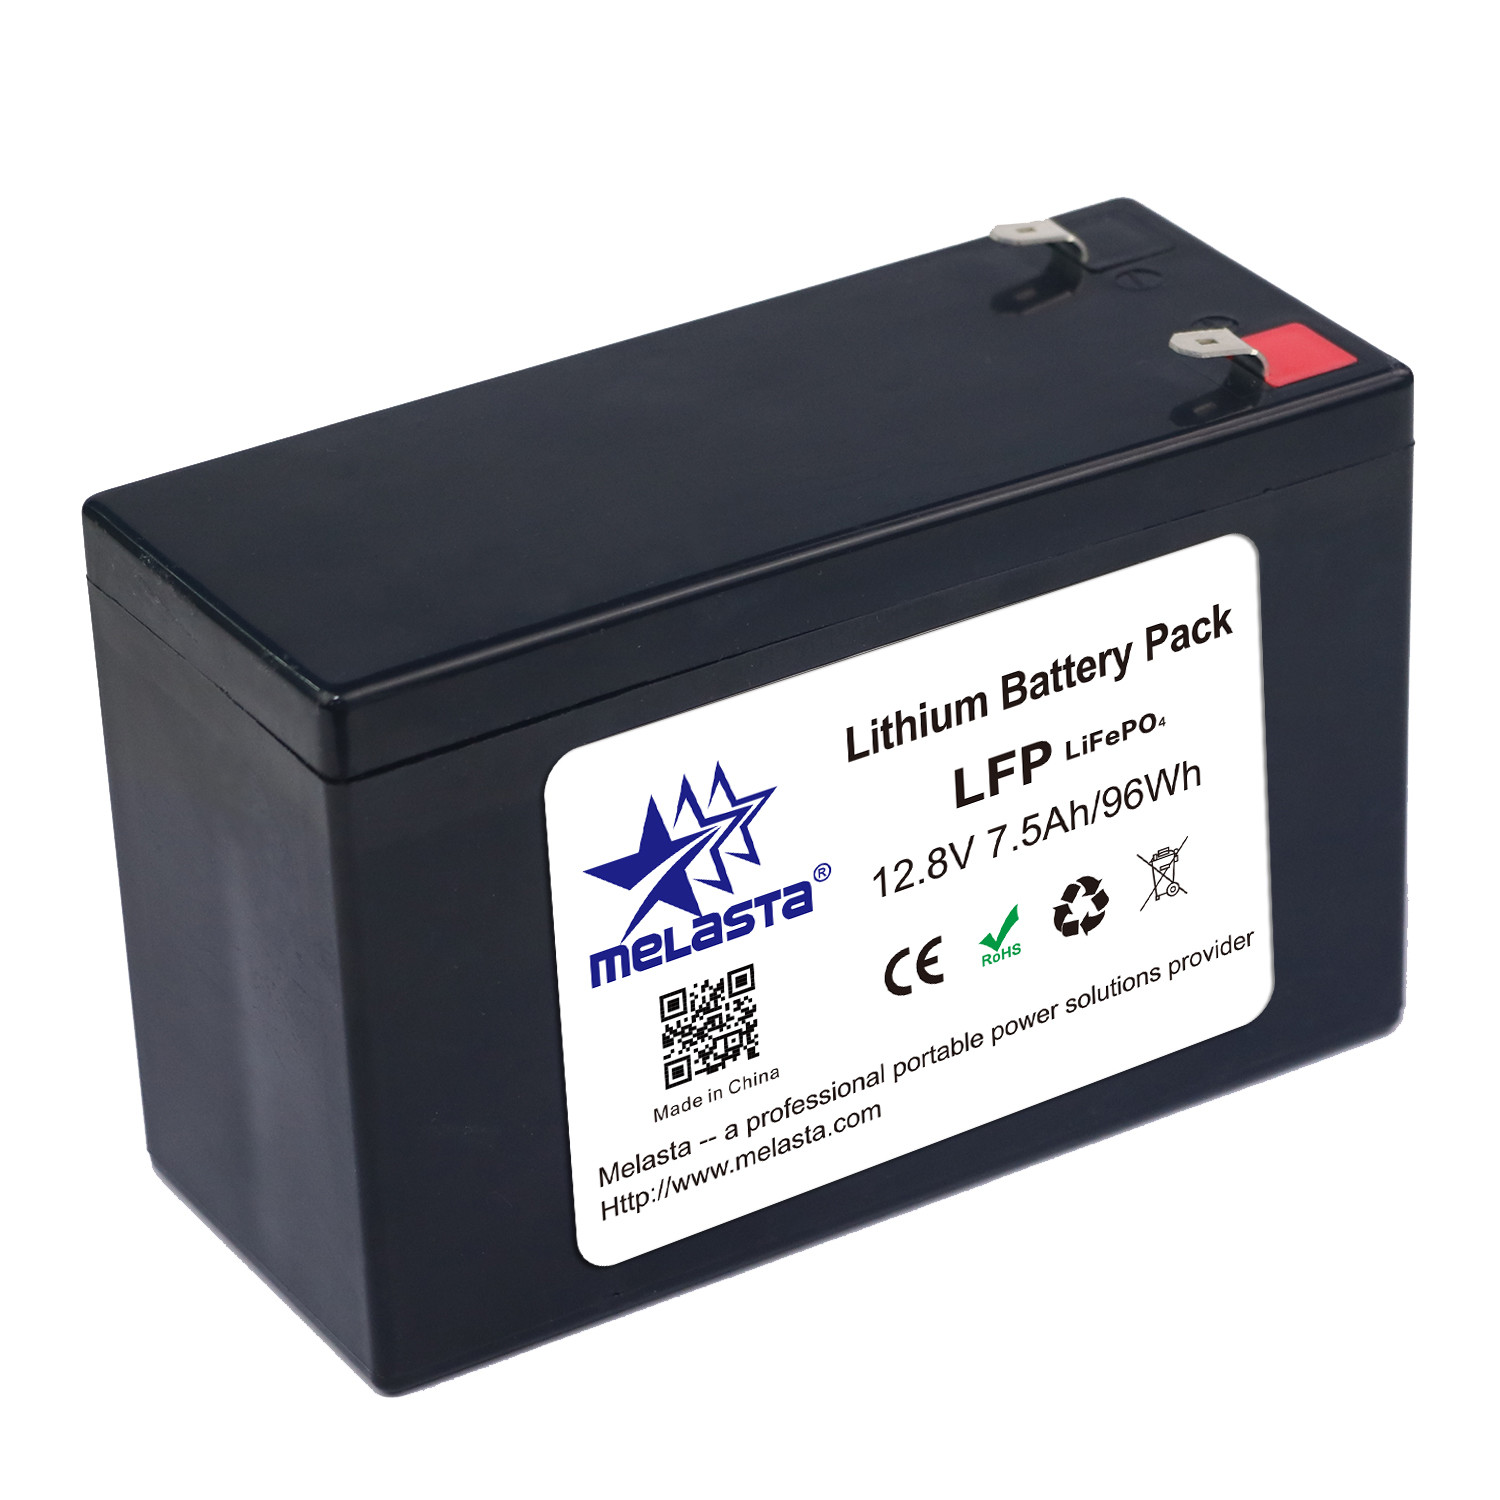 ＞2000 cycles 12.8V 7.5Ah LiFePo4 lithium battery pack for UPS, solar lighting